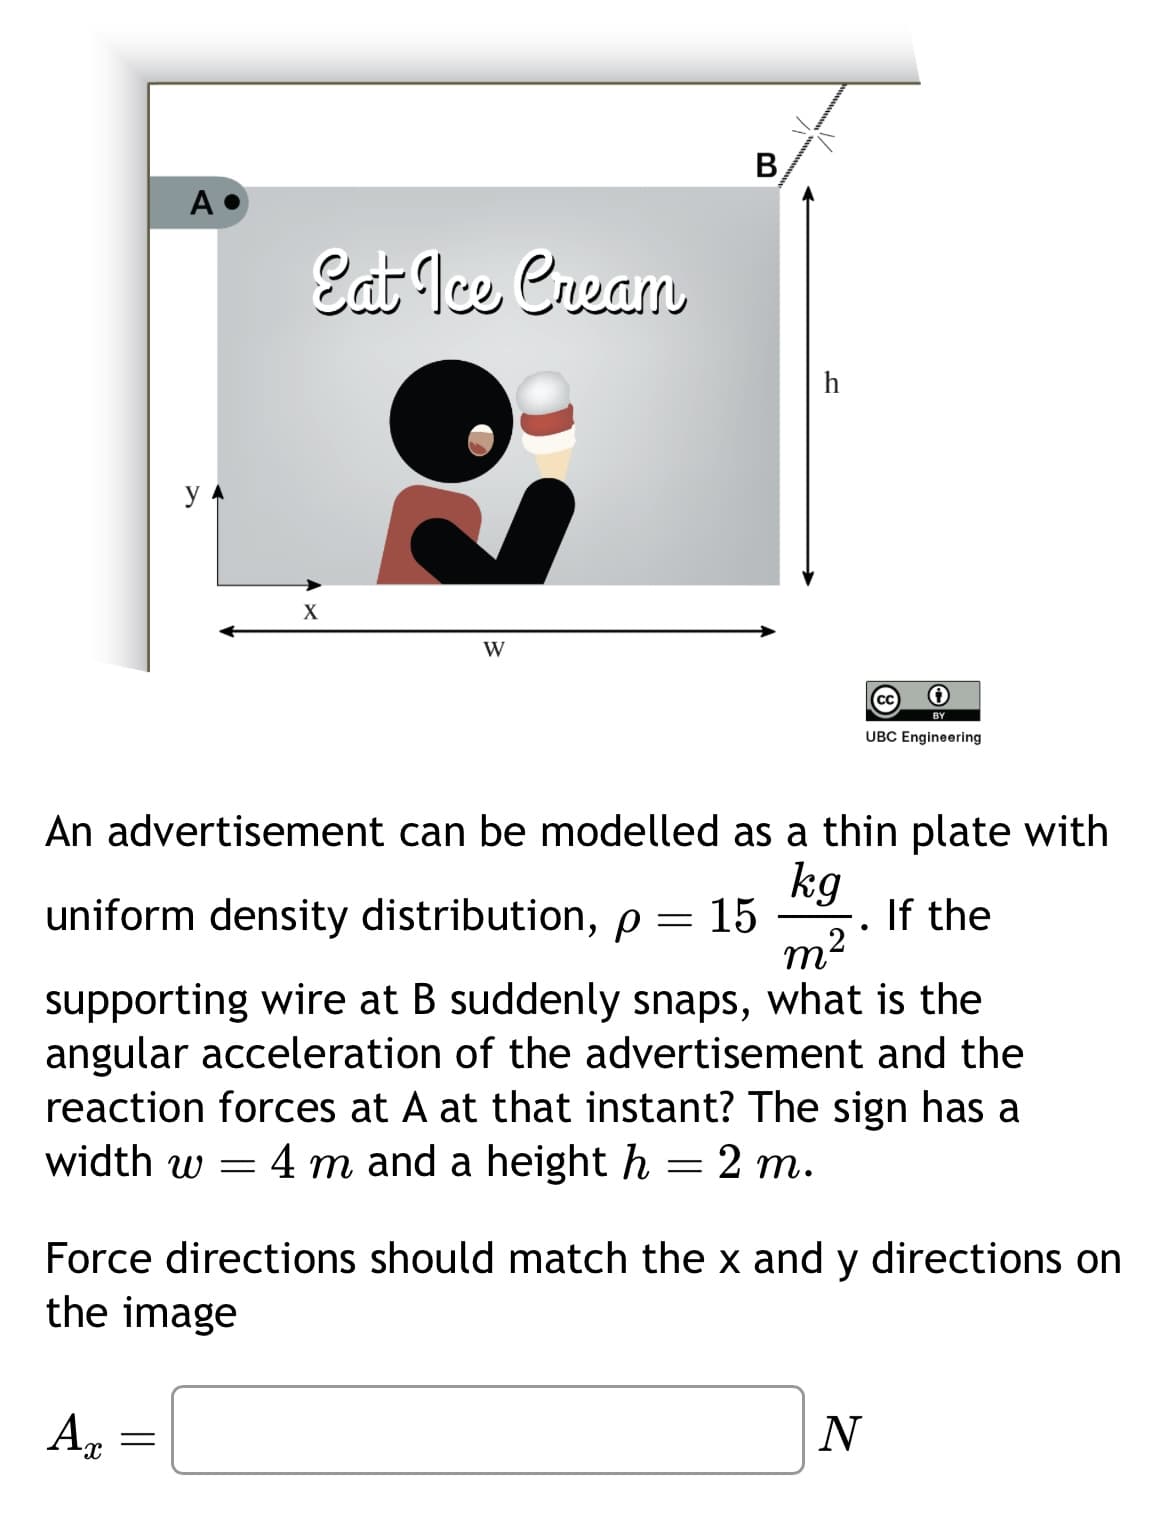 B
A
Eat Ice Cream
h
y
X
W
UBC Engineering
An advertisement can be modelled as a thin plate with
uniform density distribution, p = 15
kg
m²
If the
supporting wire at B suddenly snaps, what is the
angular acceleration of the advertisement and the
reaction forces at A at that instant? The sign has a
width w = 4 m and a height h = 2 m.
Force directions should match the x and y directions on
the image
Ax
=
N